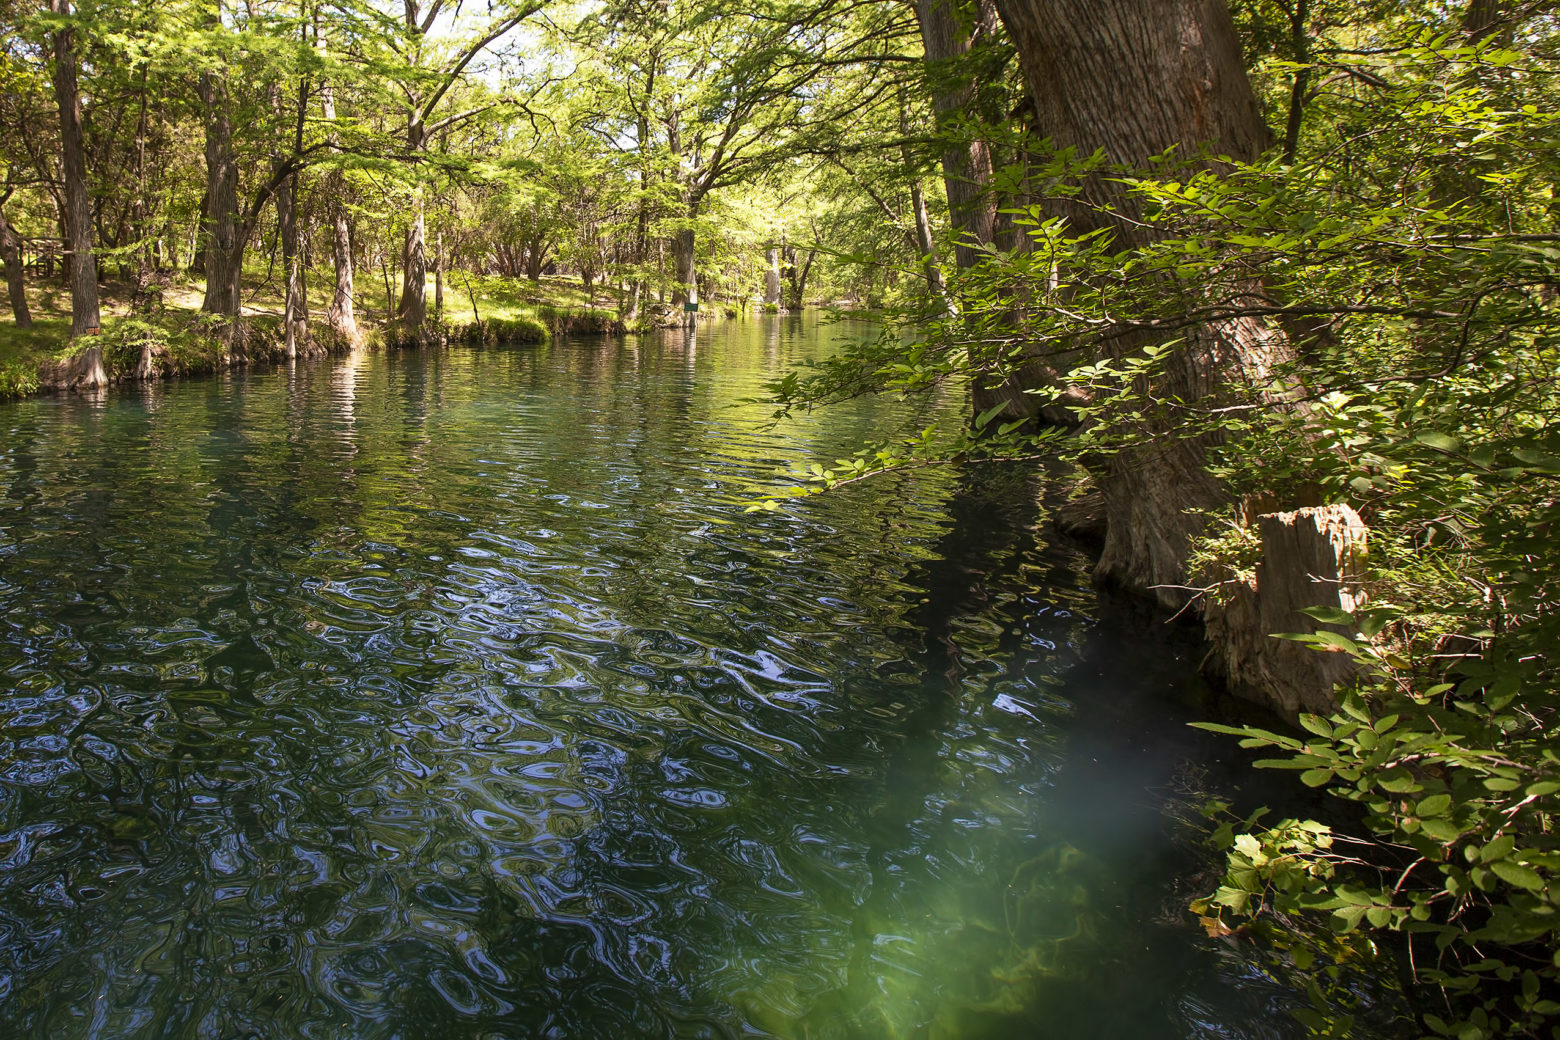 Things to Do in Wimberley, Texas Day Trips